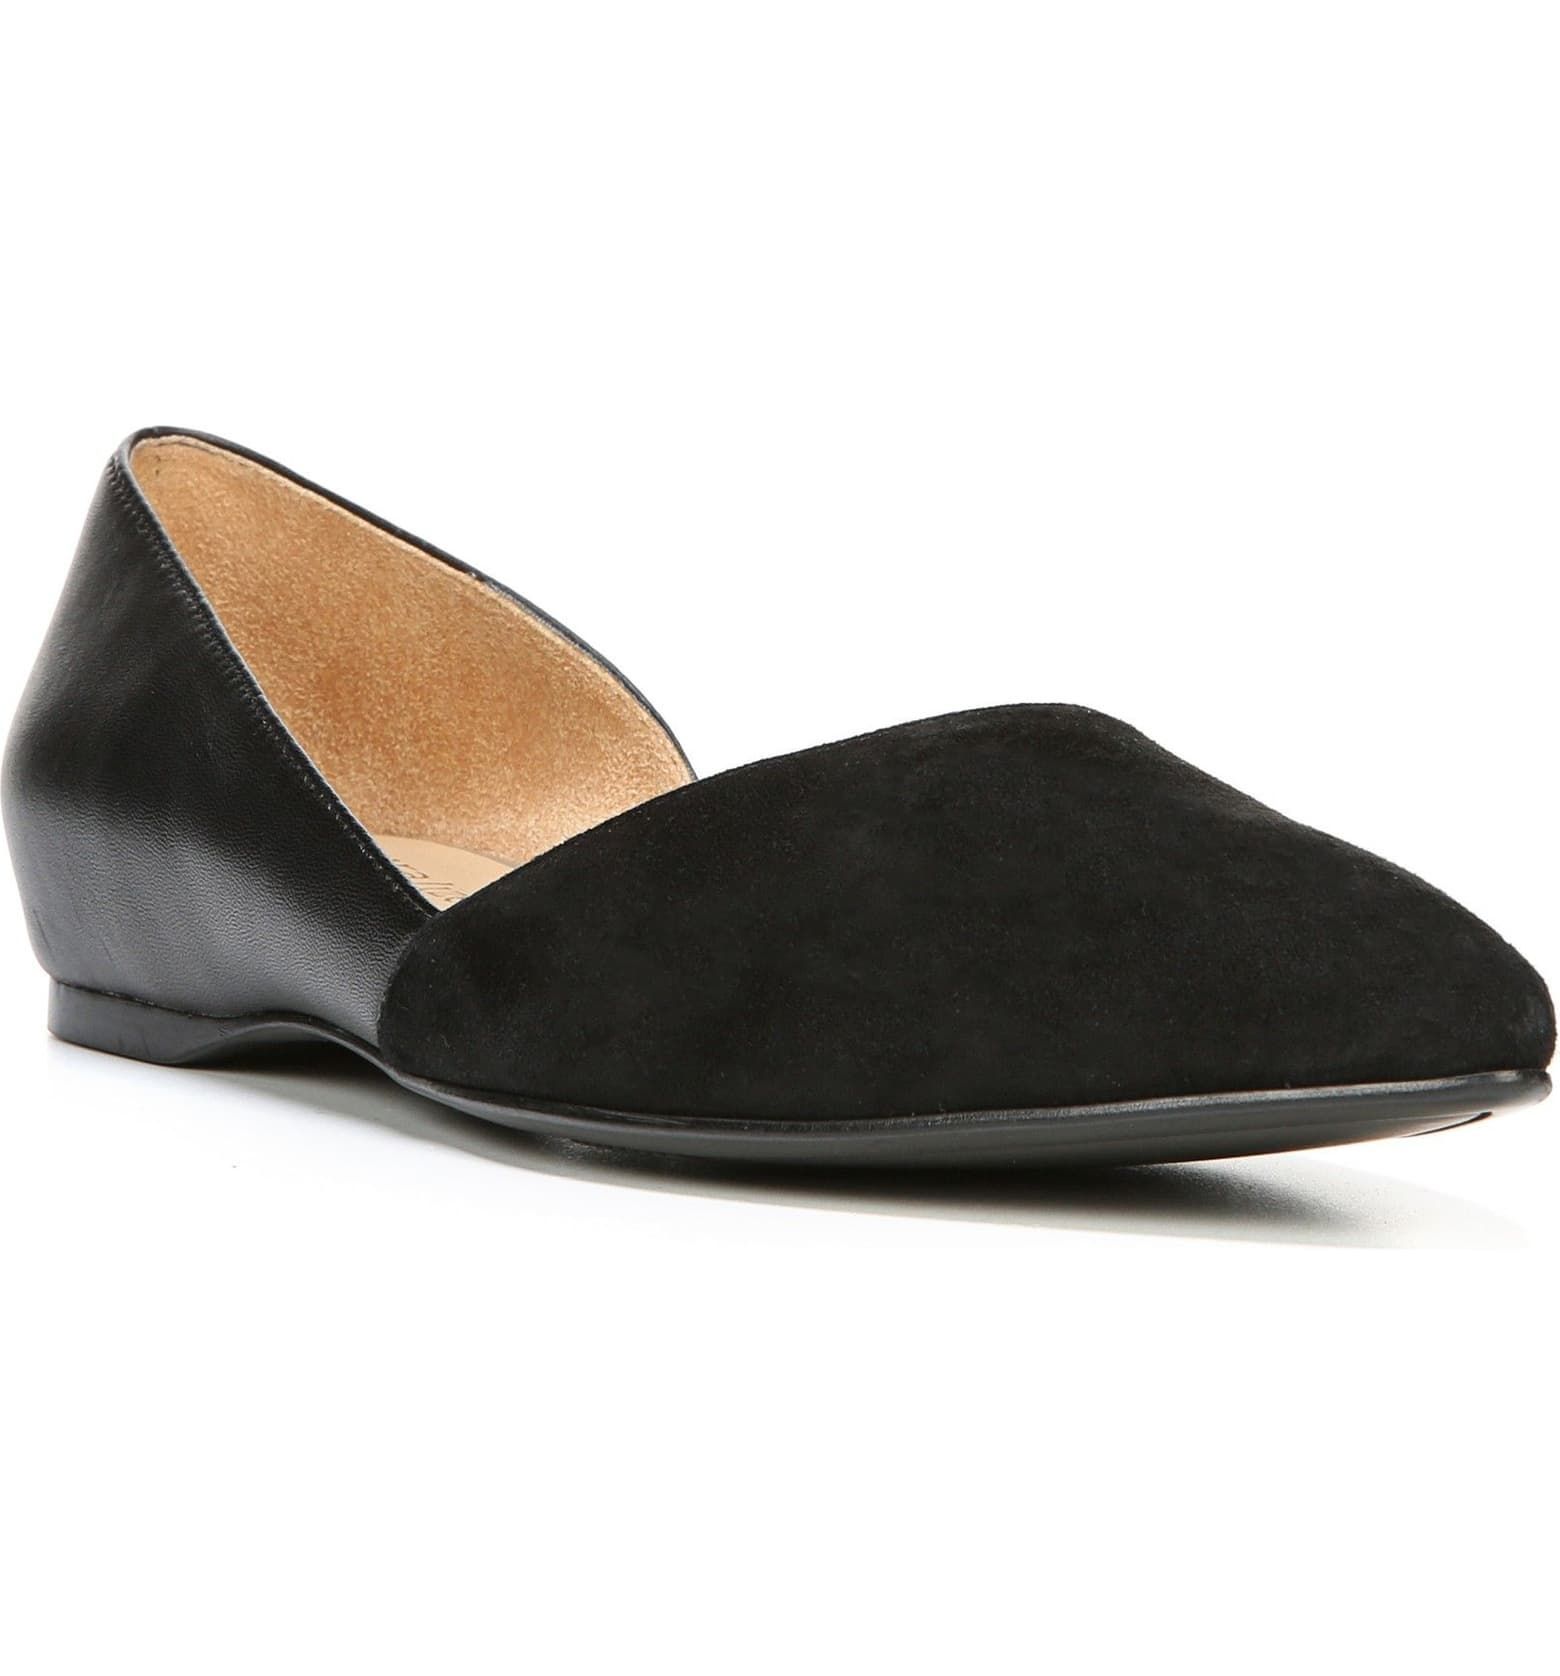 comfortable leather flats